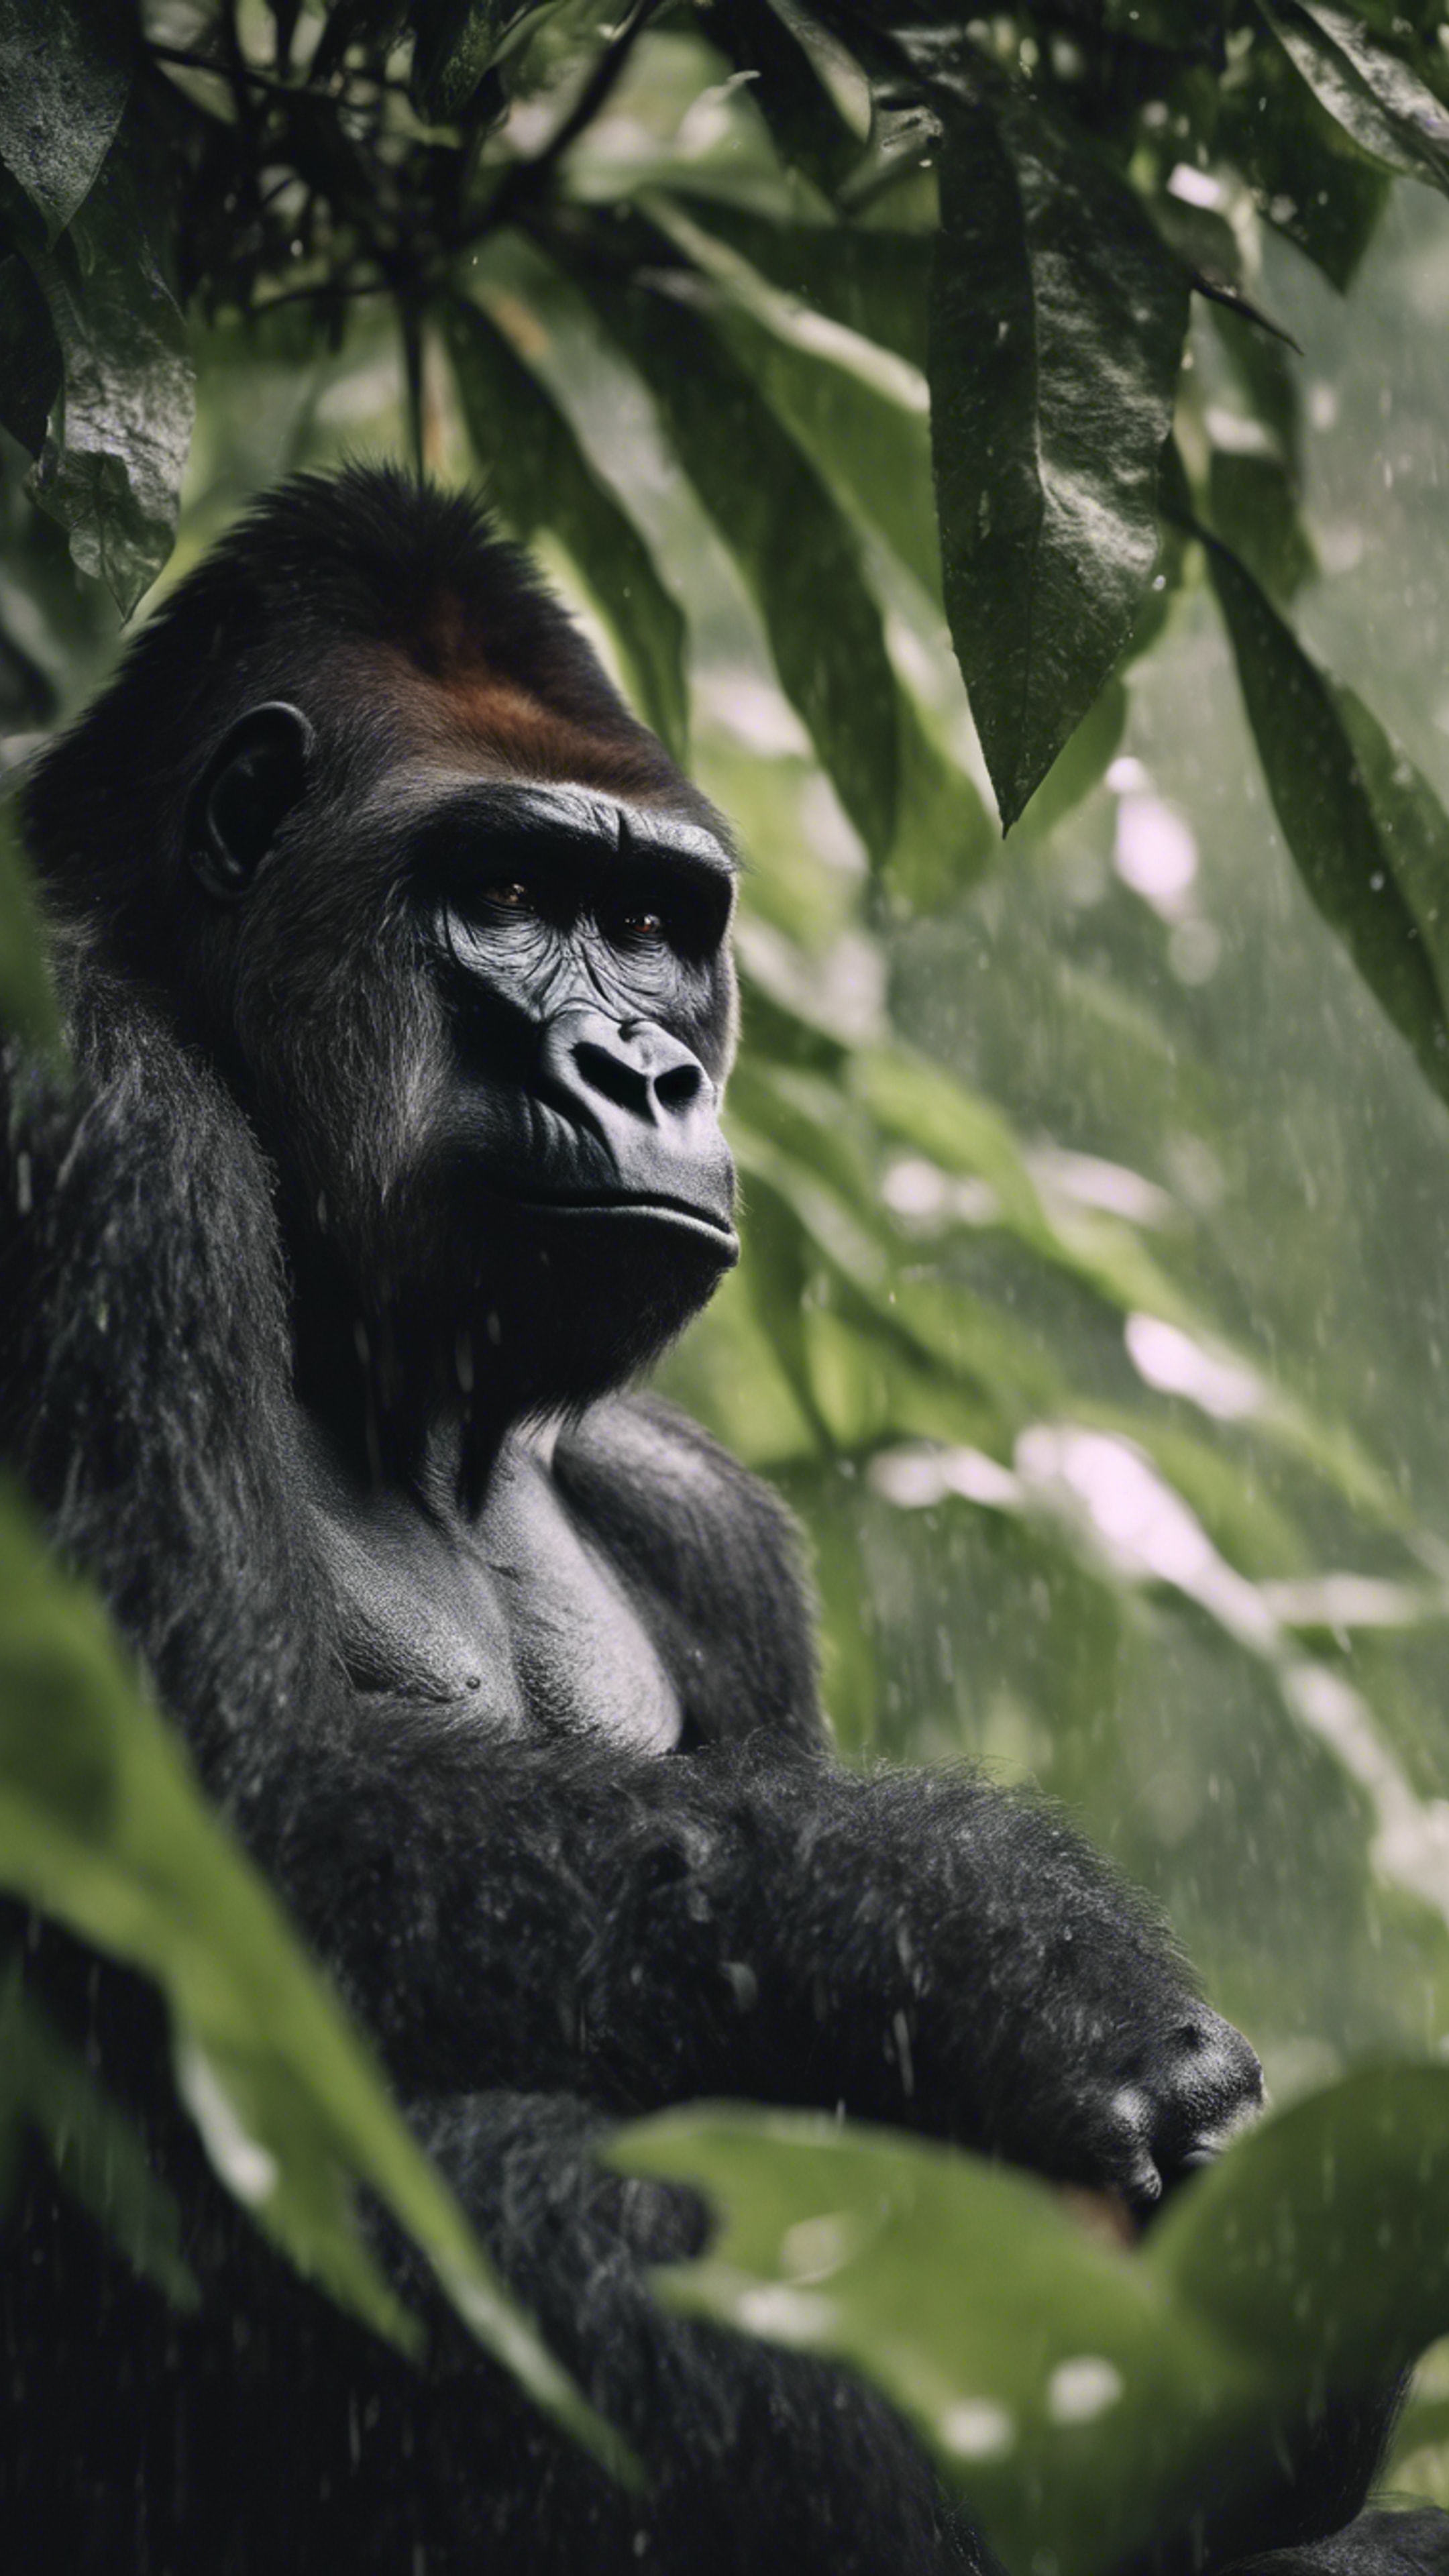 A sad gorilla on a rainy day, gazing out from under the shelter of giant leaves. Wallpaper[ce7c66a51f504b8e8f6d]